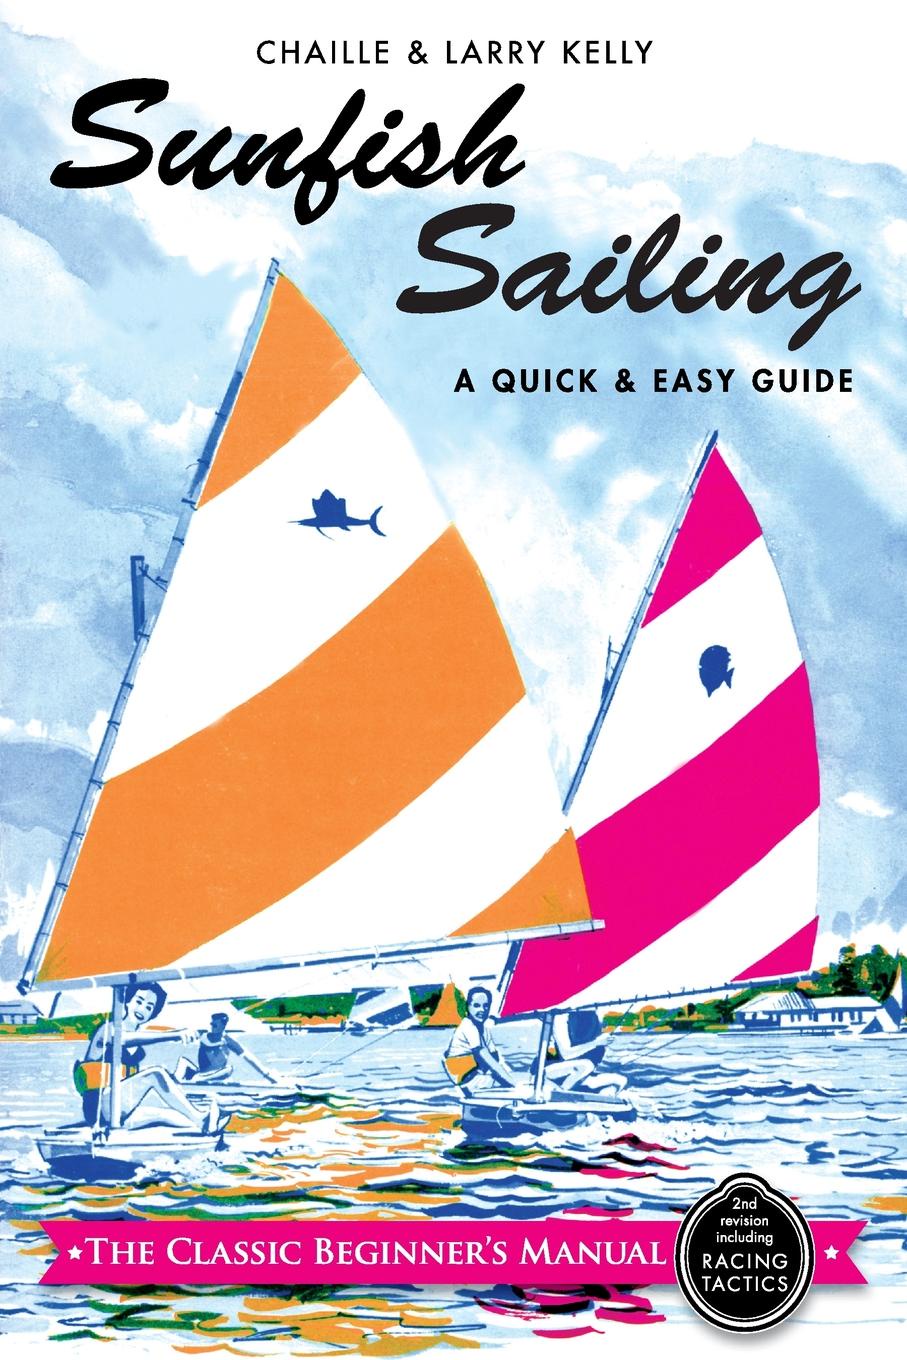 Sunfish Sailing. A Quick & Easy Guide